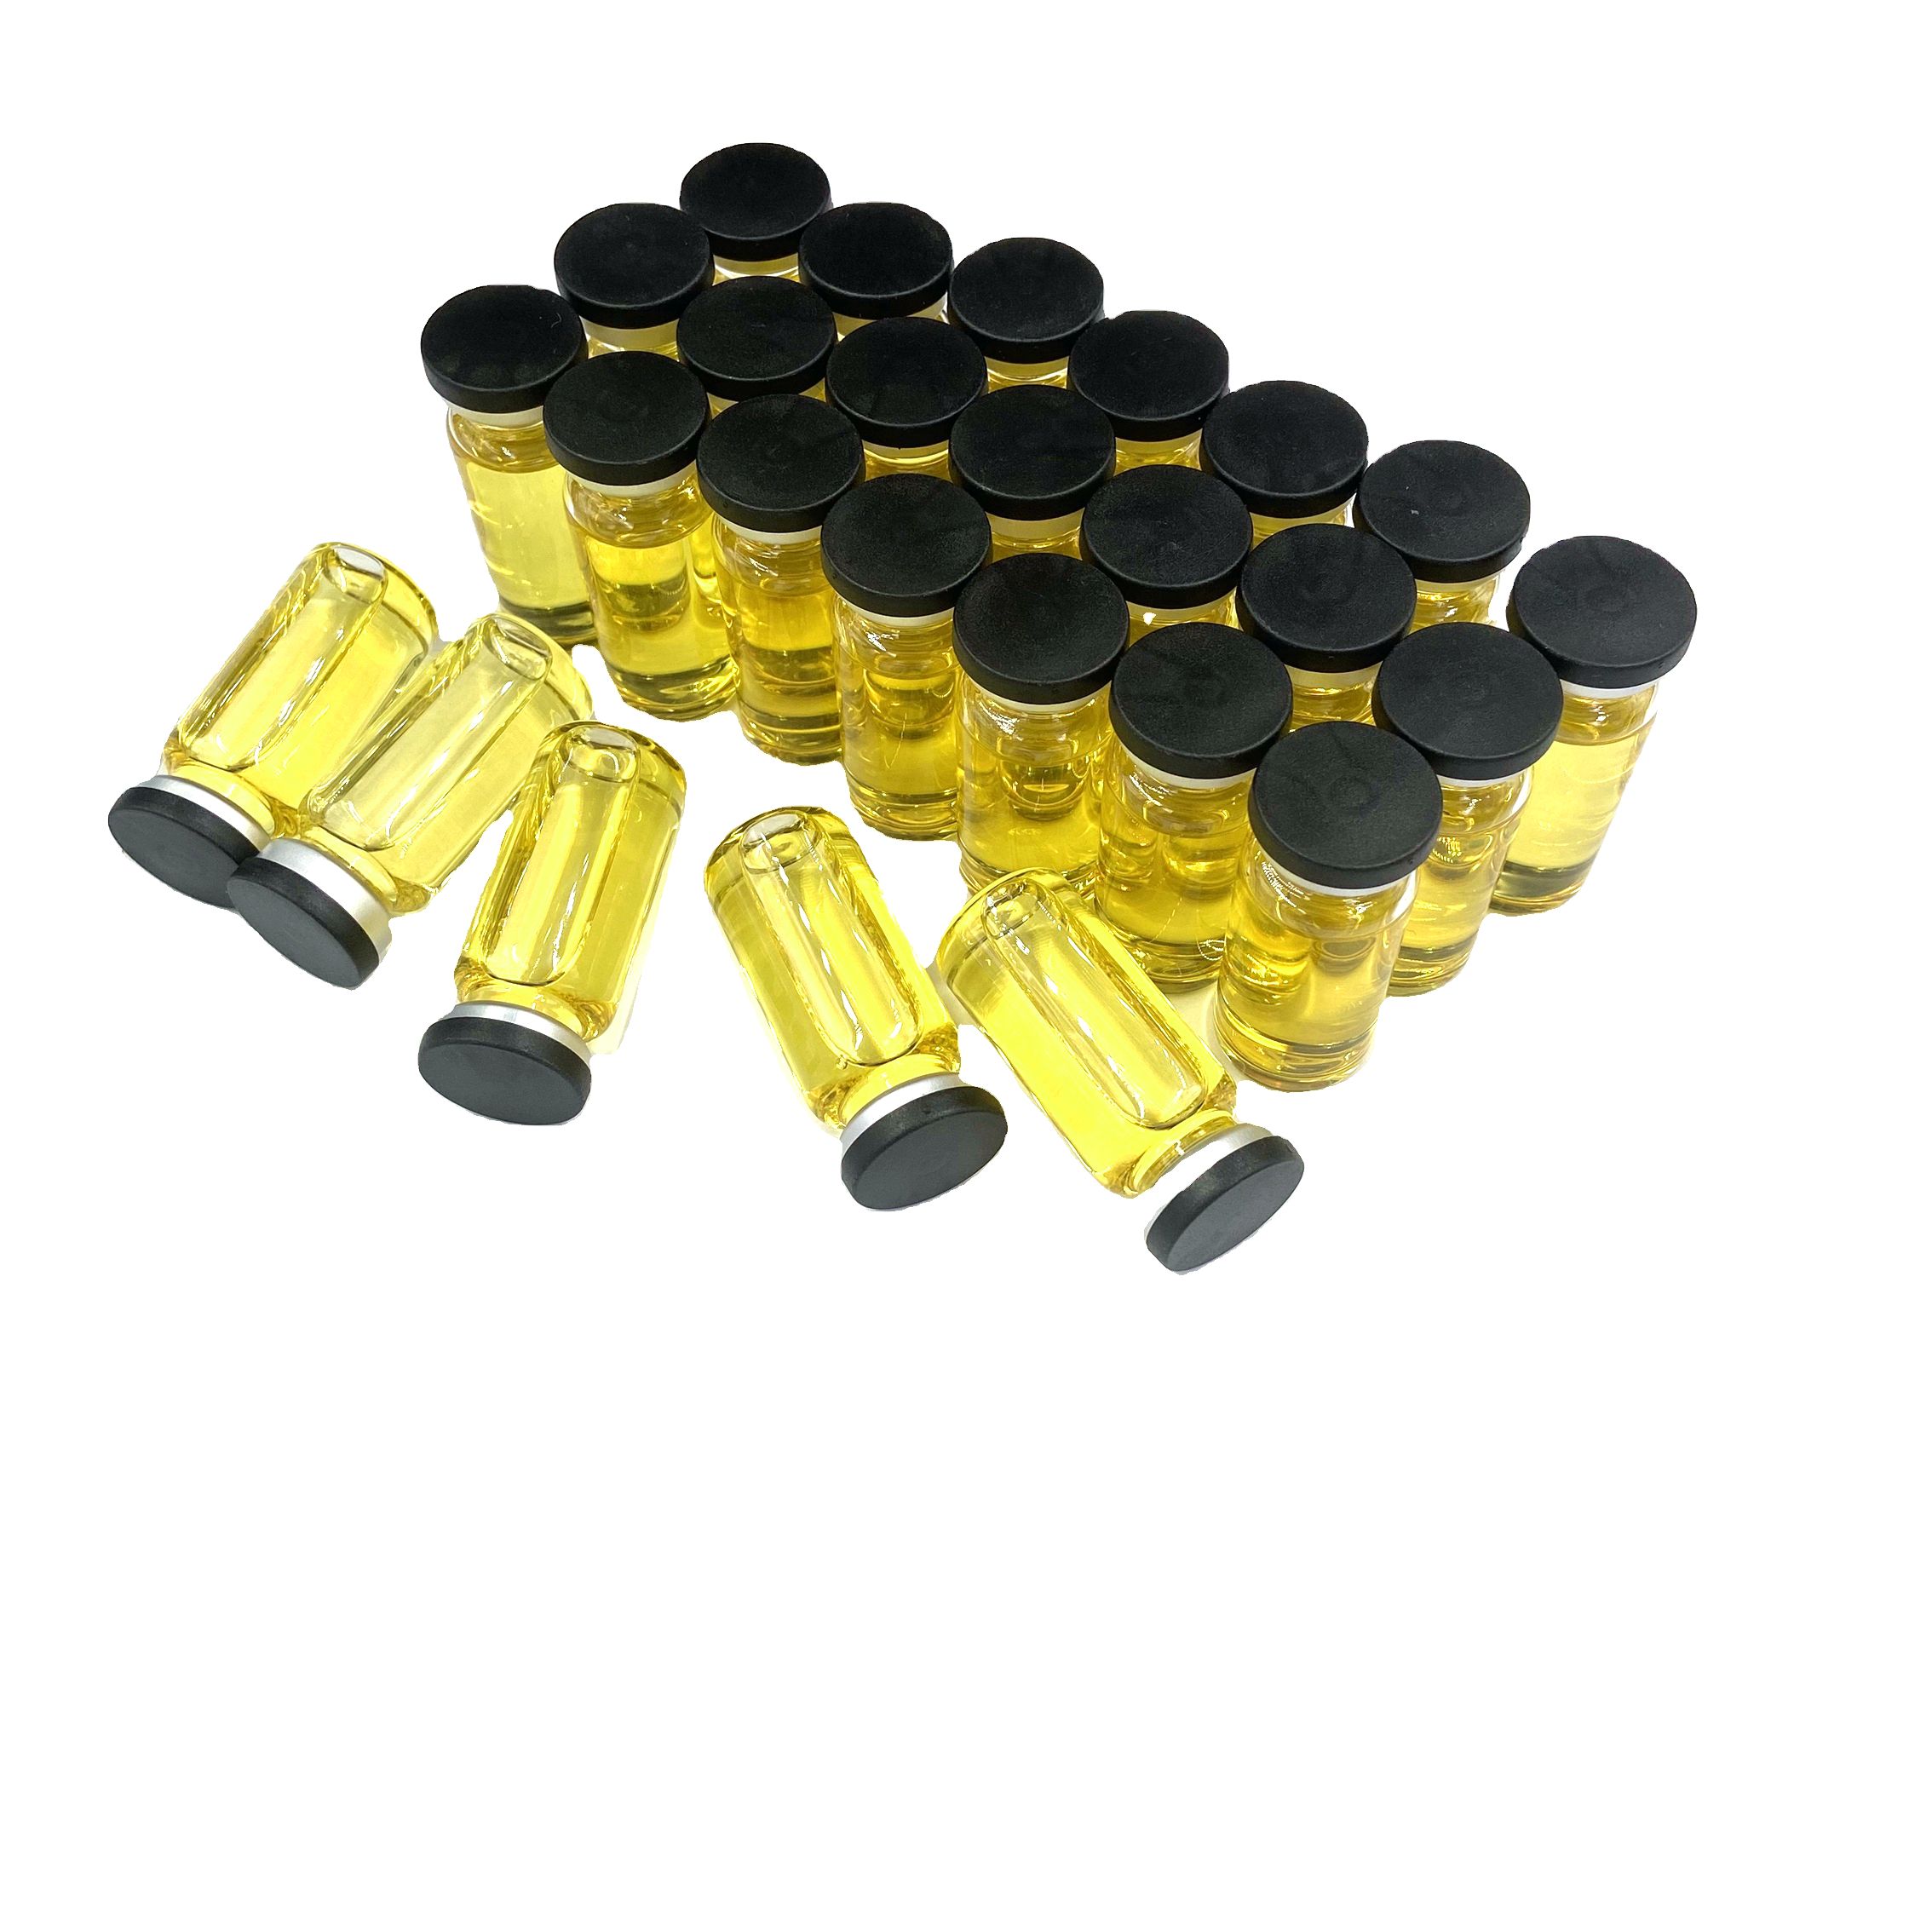 TREN-E100（Trenbolone Enanthate 100mg）Injectables 10ml Muscle Gear